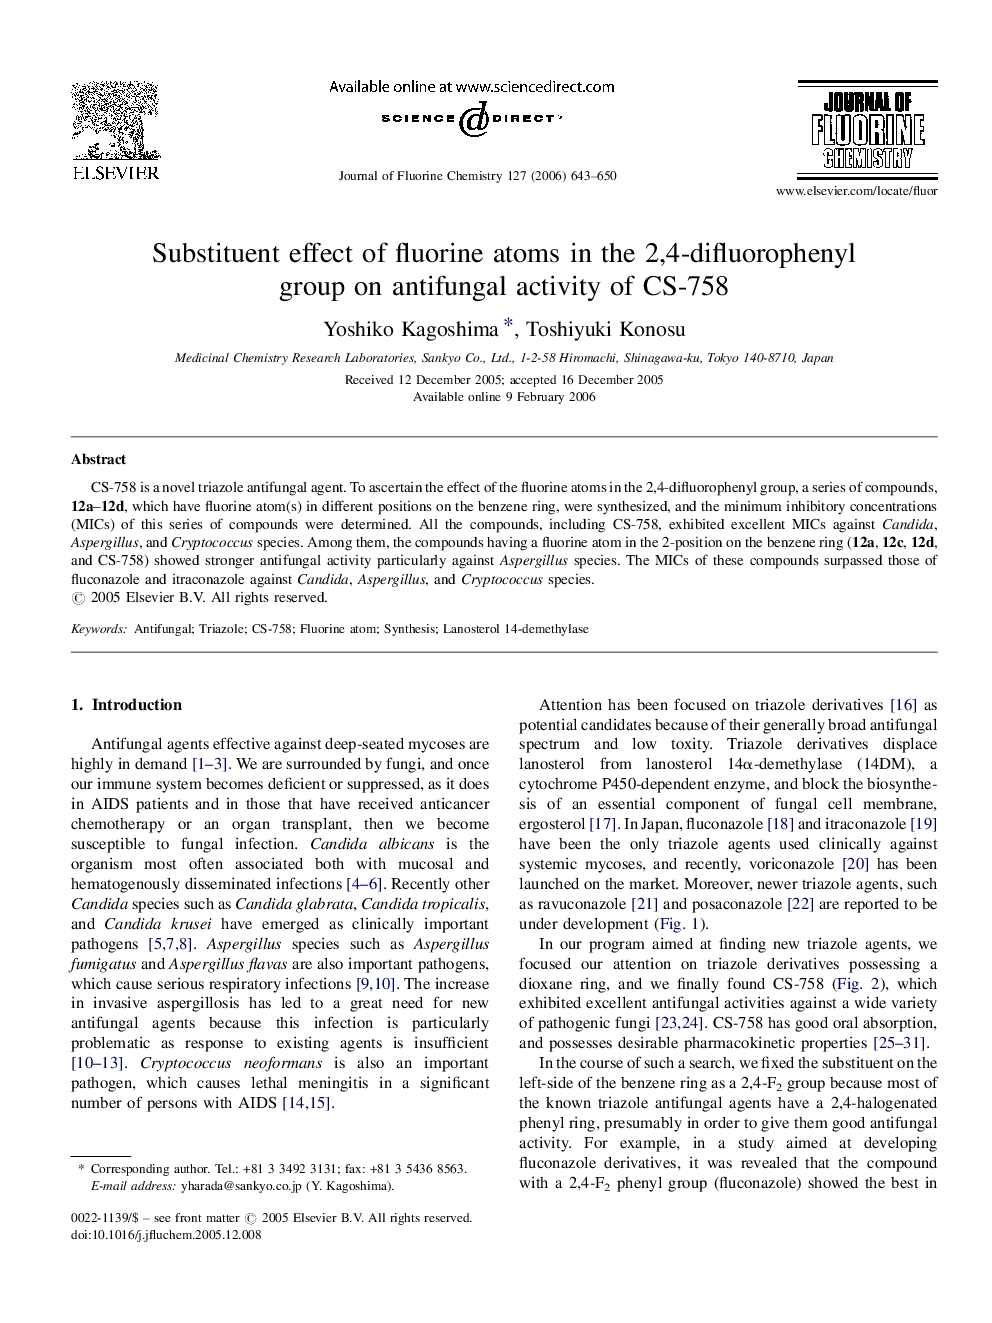 Substituent effect of fluorine atoms in the 2,4-difluorophenyl group on antifungal activity of CS-758